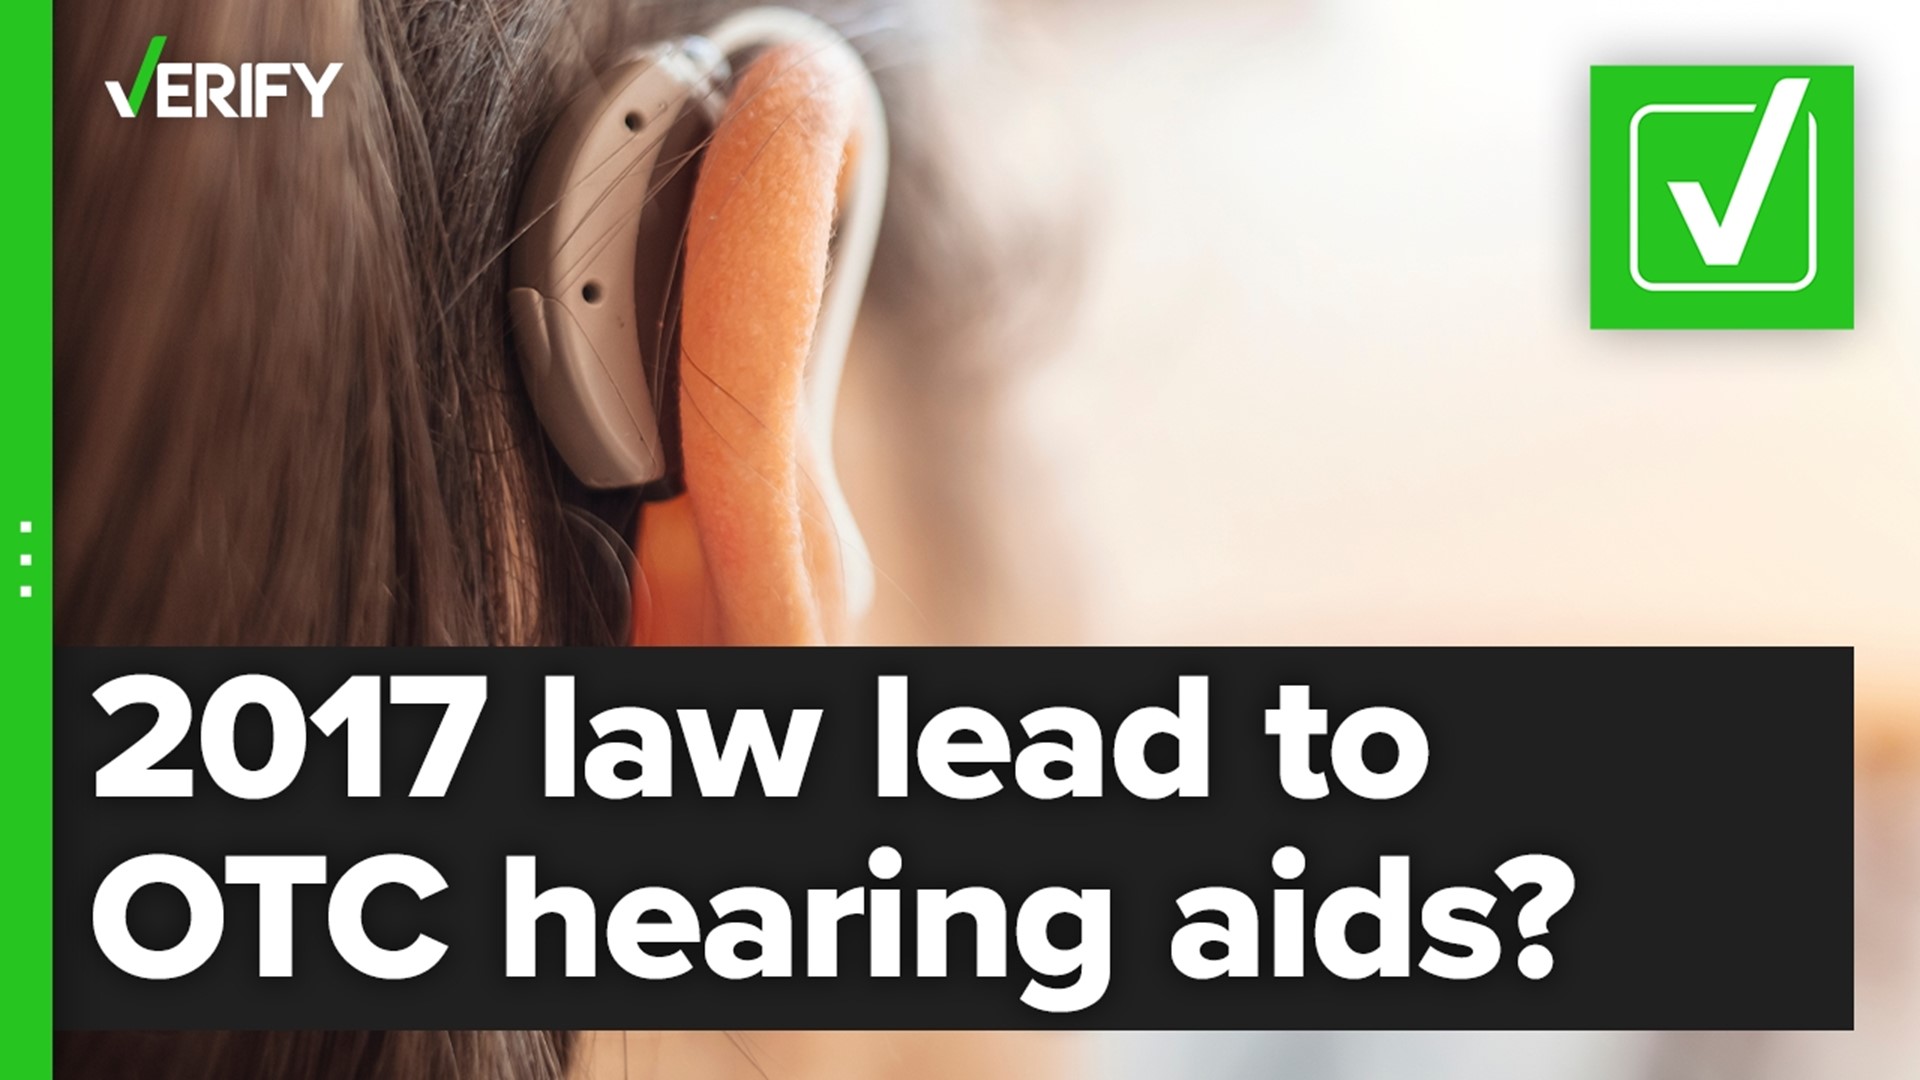 Hearing aids over the counter are coming. A 2017 bill from Warren and Grassley, a law signed by Trump and an executive order from Biden made it happen.